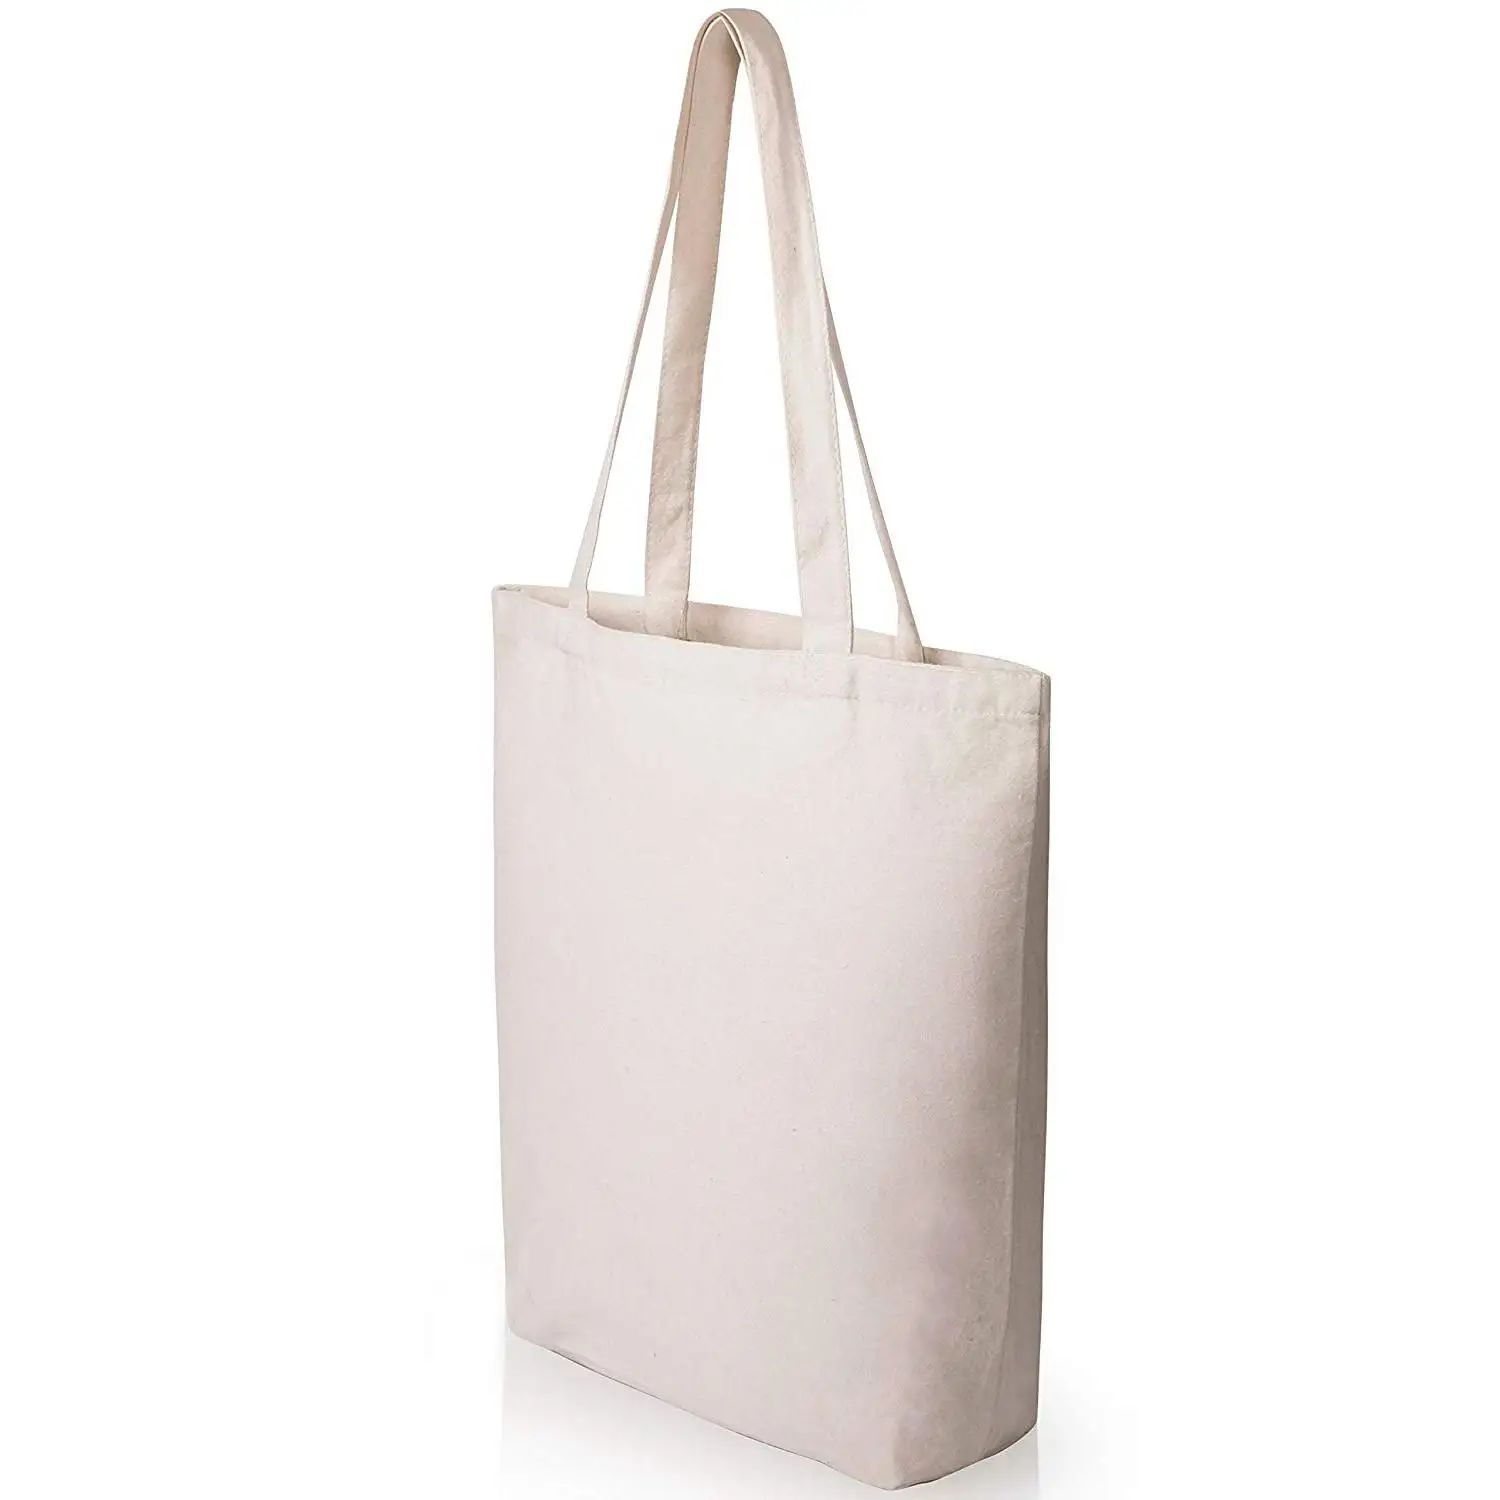 0 : Buy Heavy Duty and Strong Large Natural Canvas Tote Bags with Bottom Gusset for ...